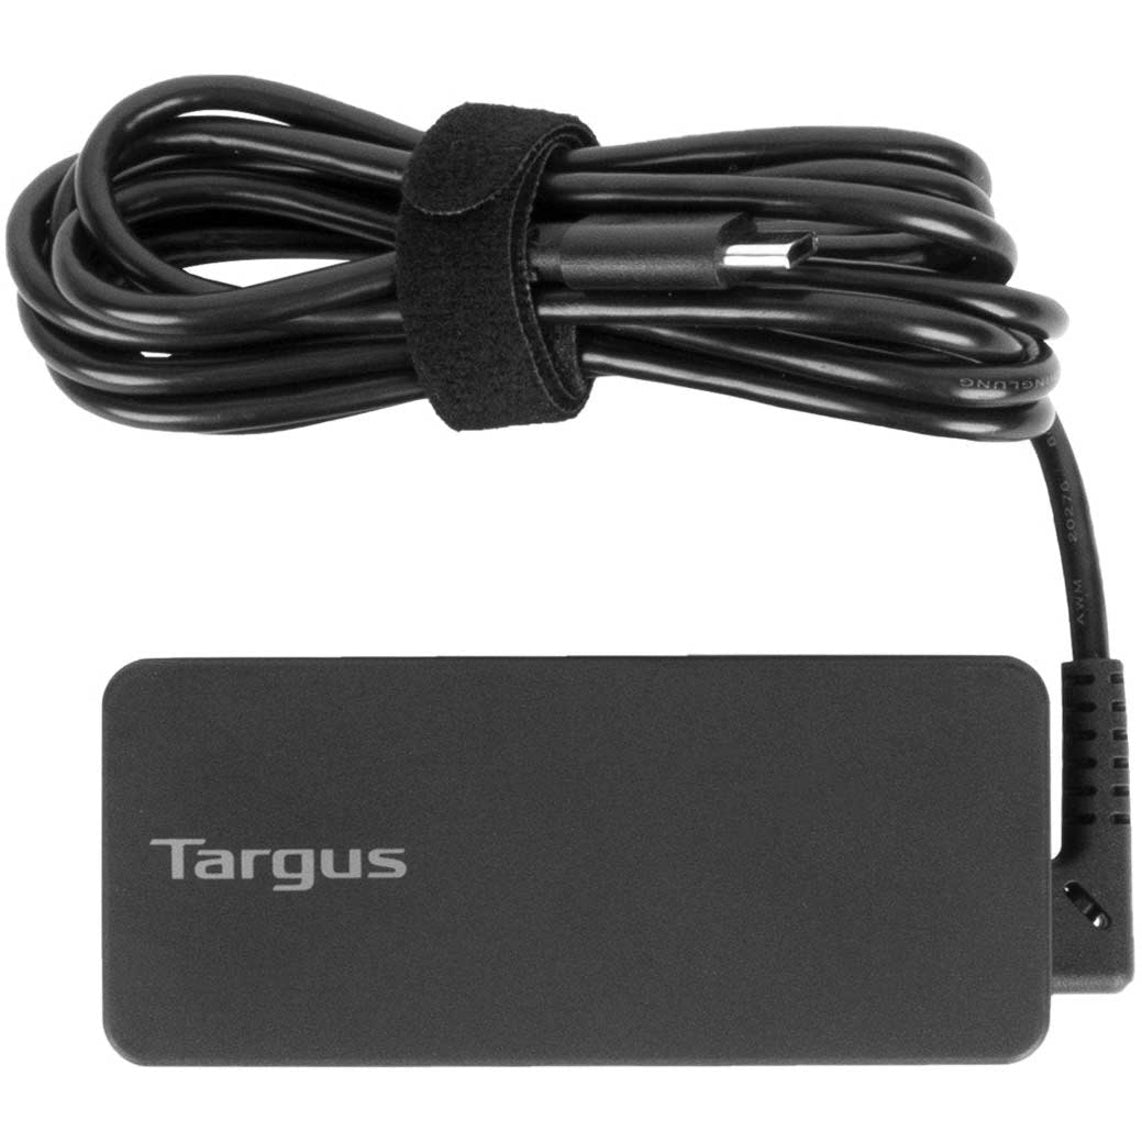 Targus 45W USB-C Charger - Fast Charging for Tablets, Smartphones, and Notebooks [Discontinued]